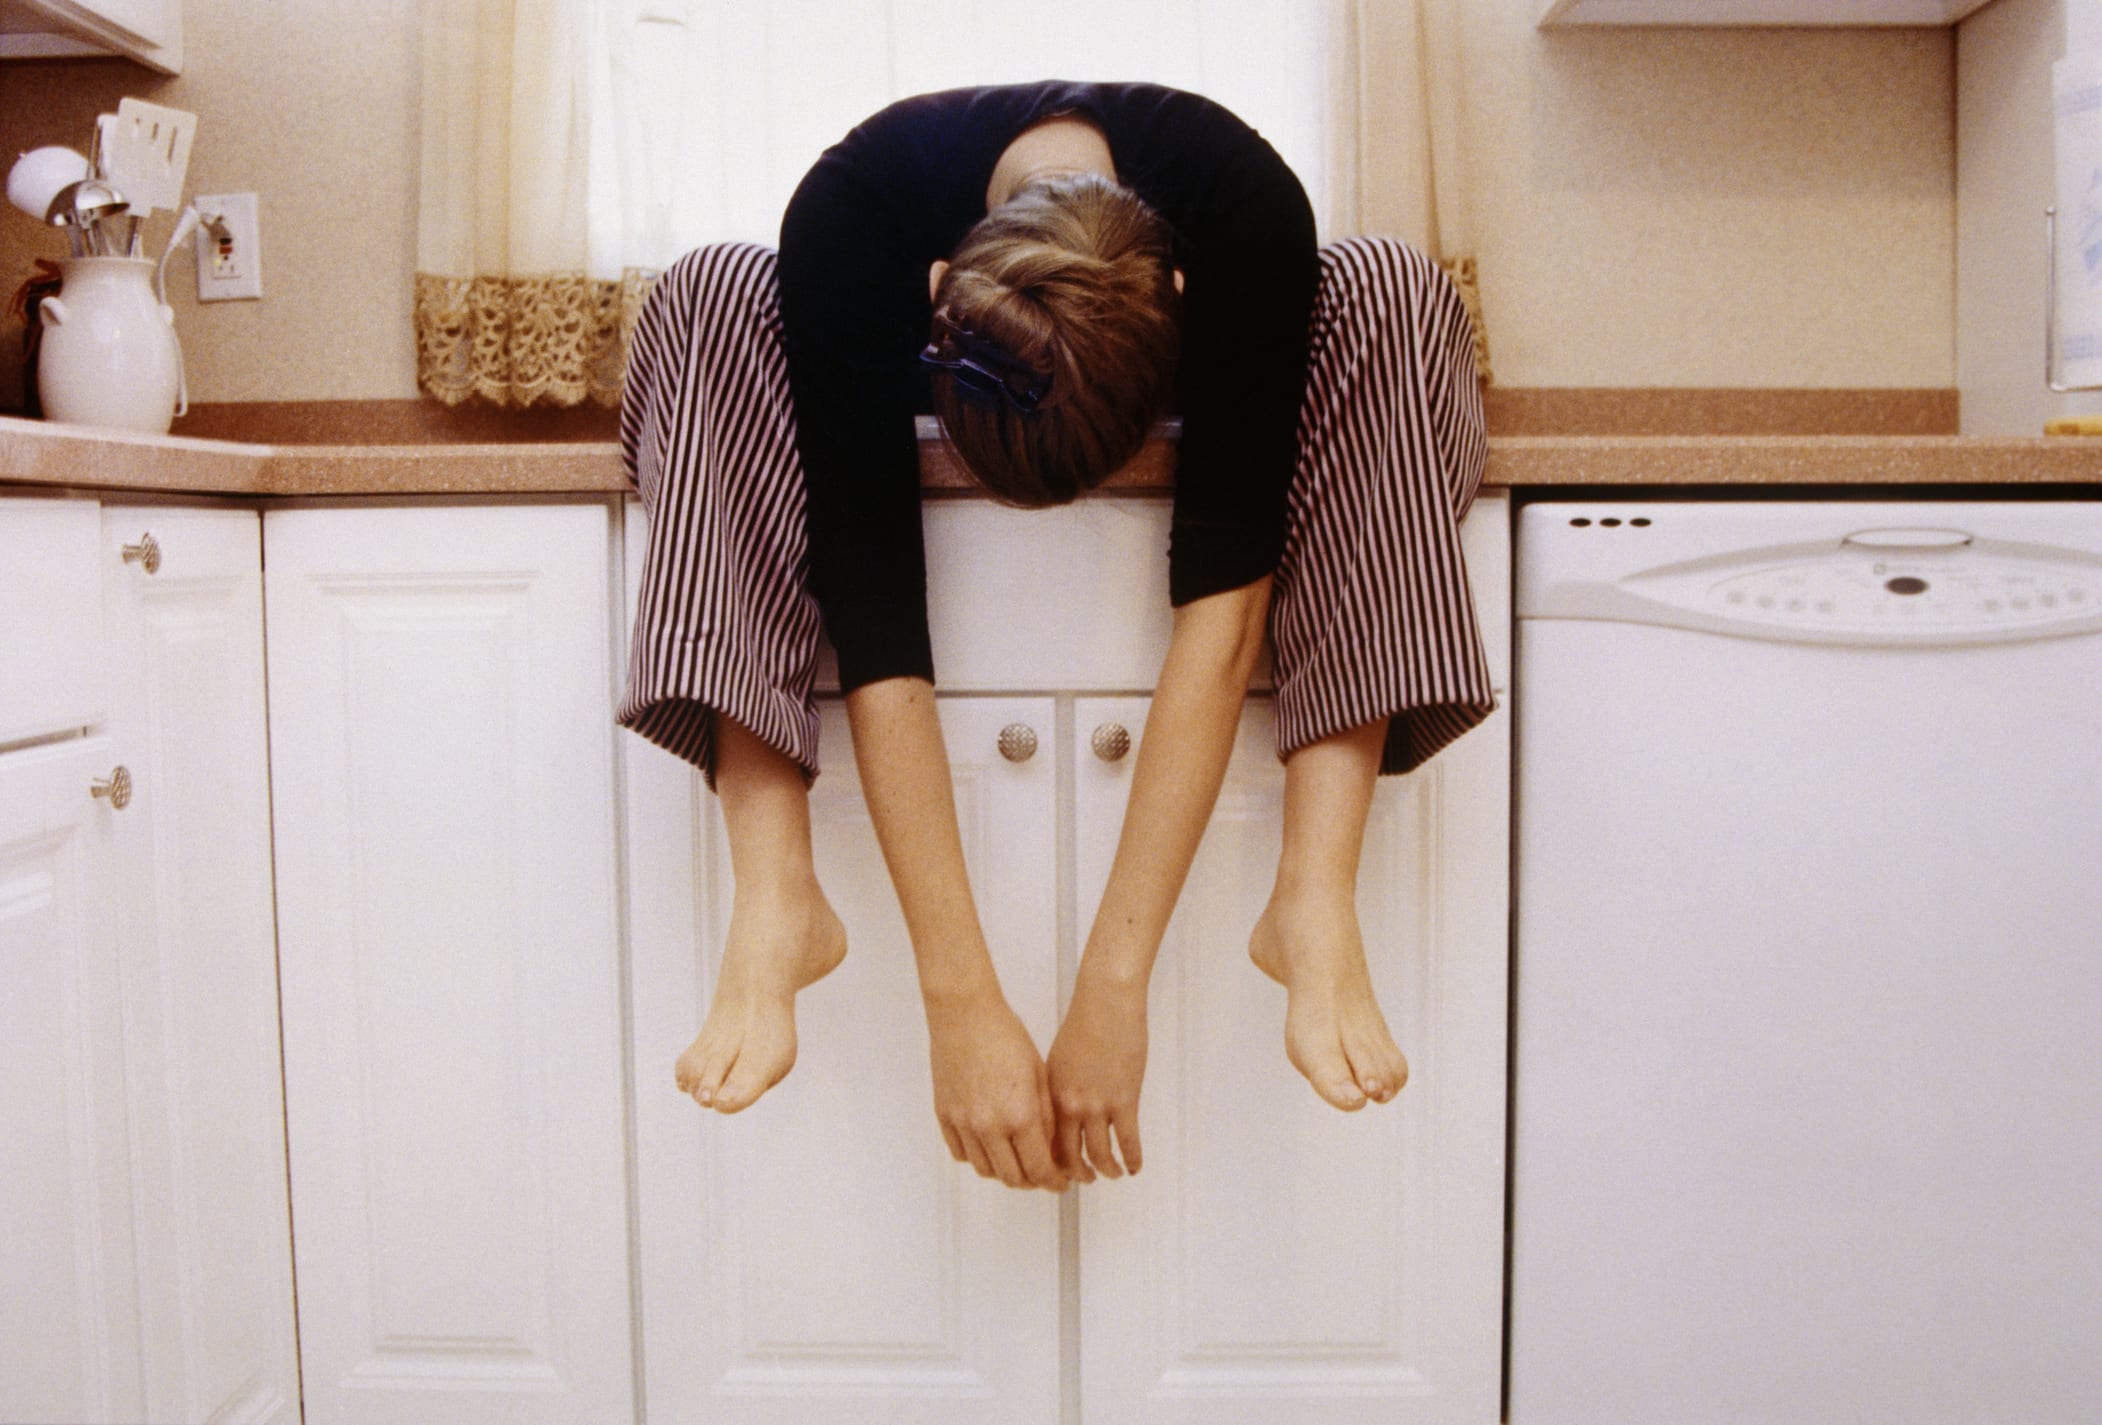 Young Woman Sitting on Kitchen Cupboard